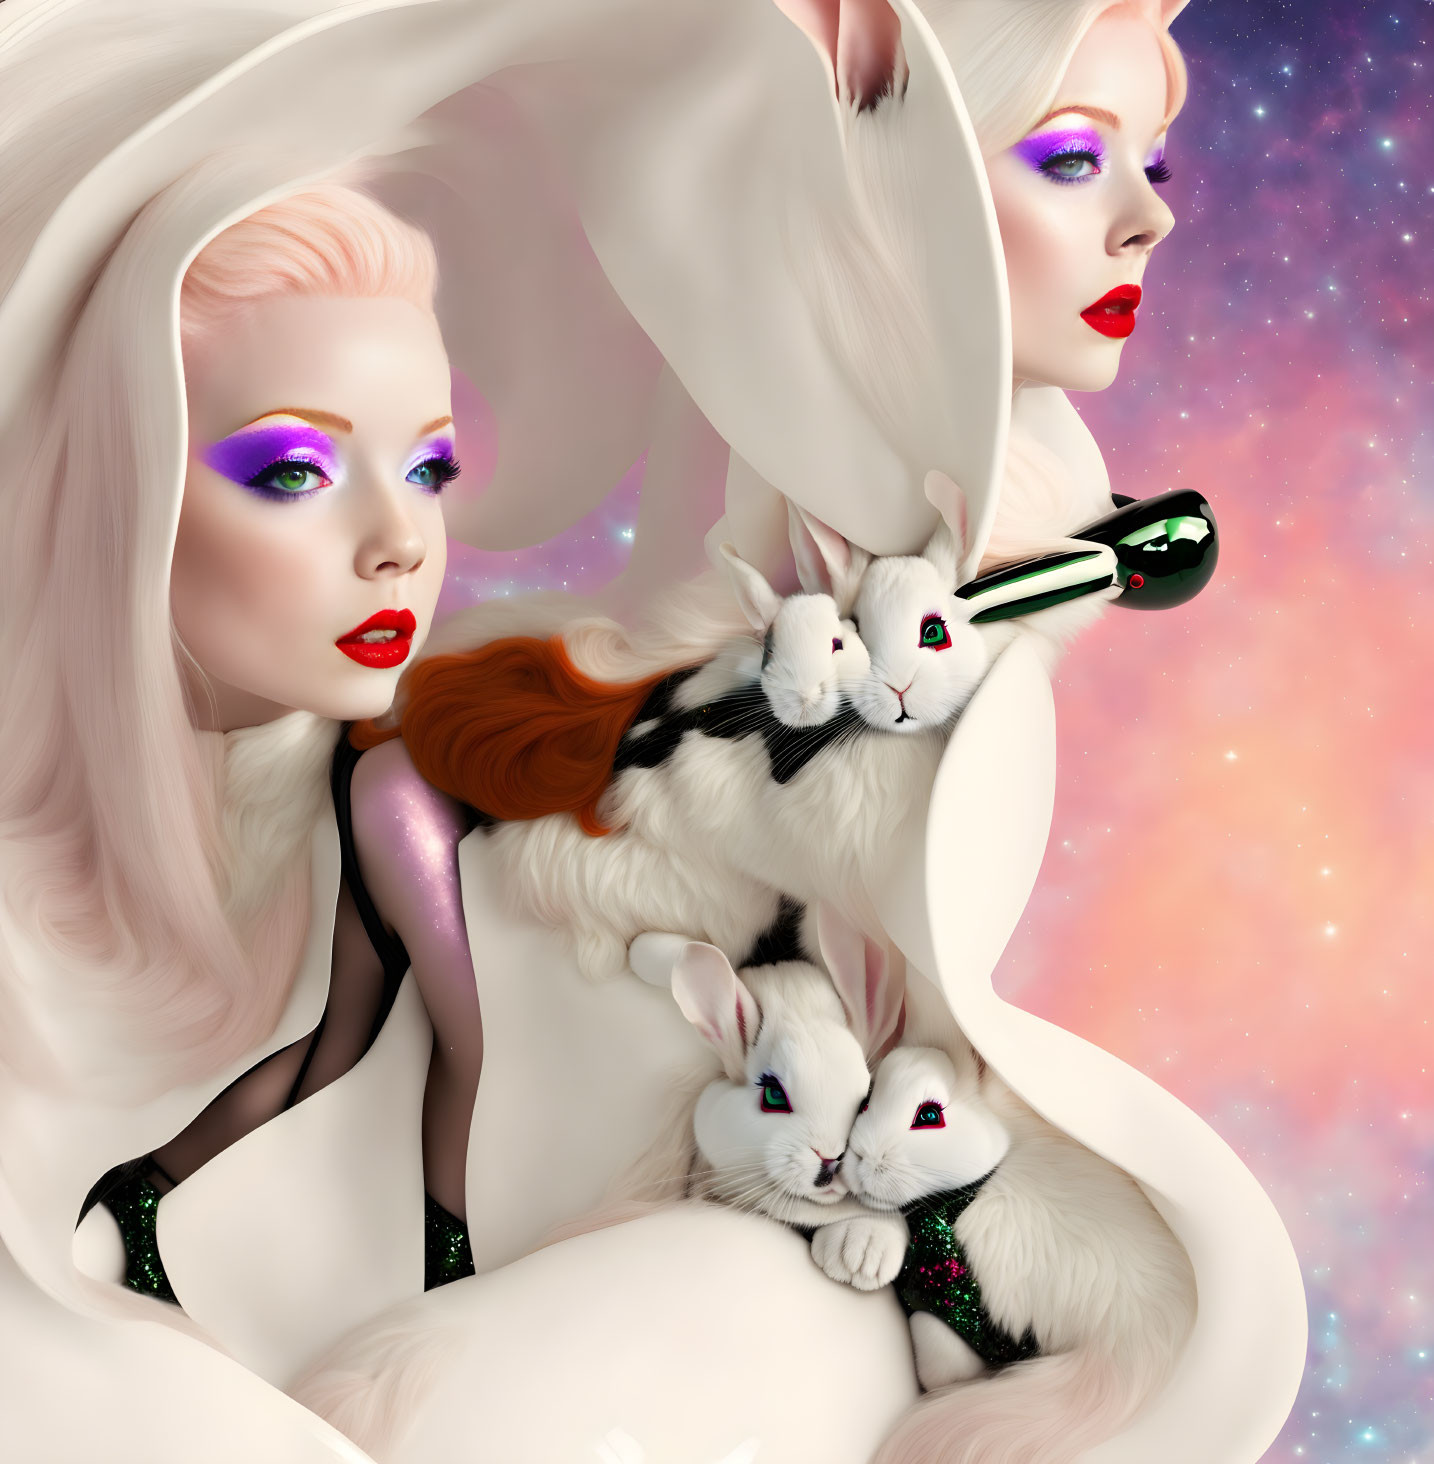 Stylized women with colorful makeup posing with white rabbits against starry backdrop